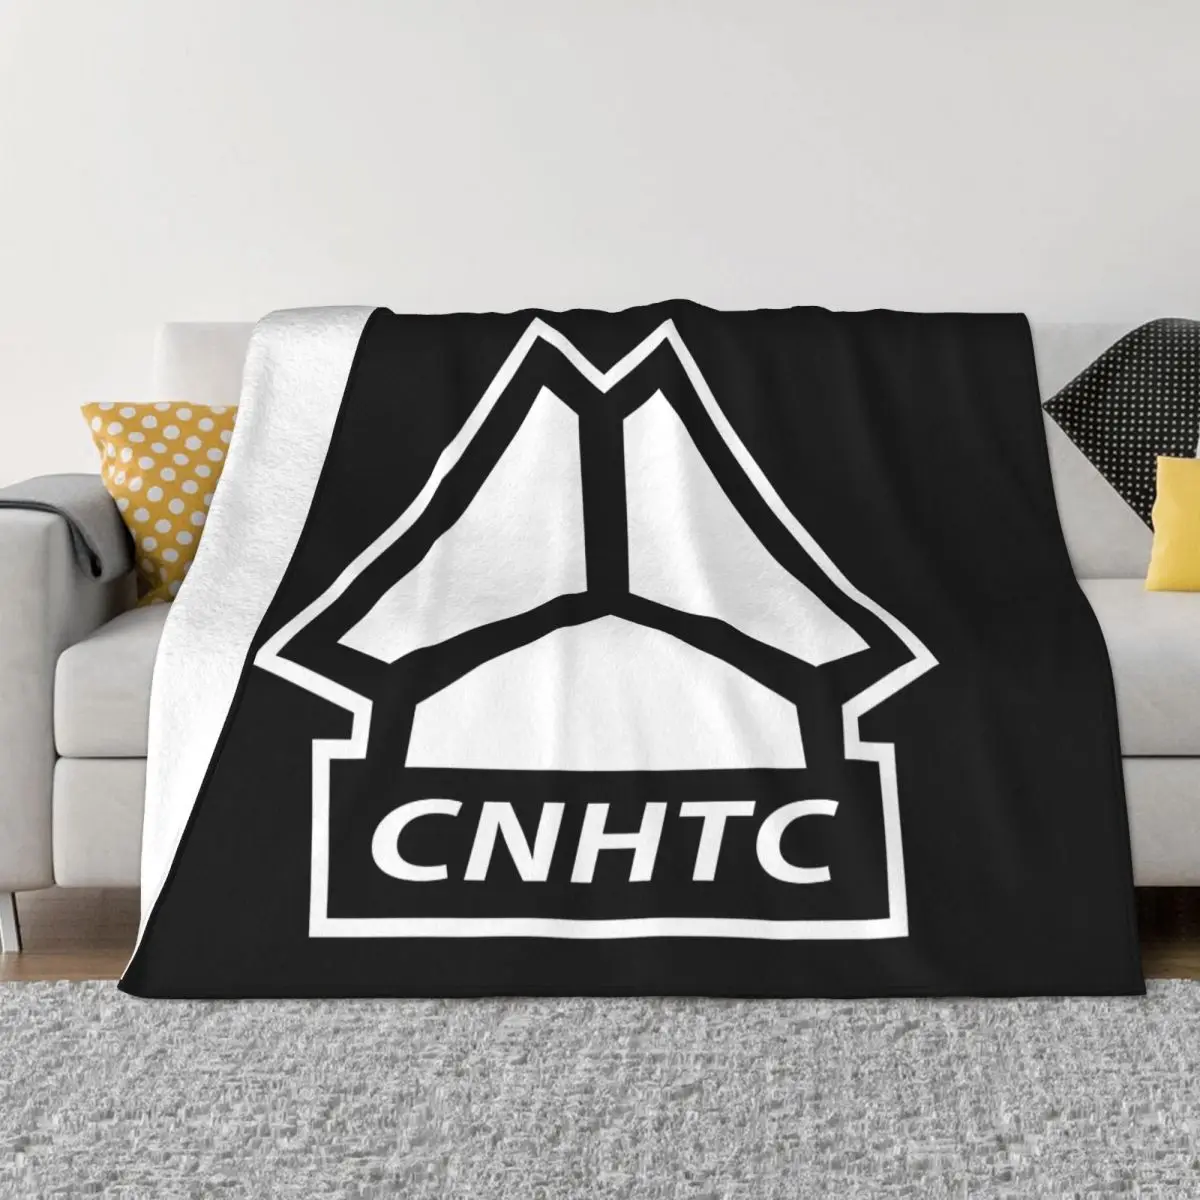 

CNHTC HOWO Blankets and Throws Super Soft Thermal Indoor Outdoor Blanket for Living Room Bedroom Office Travel